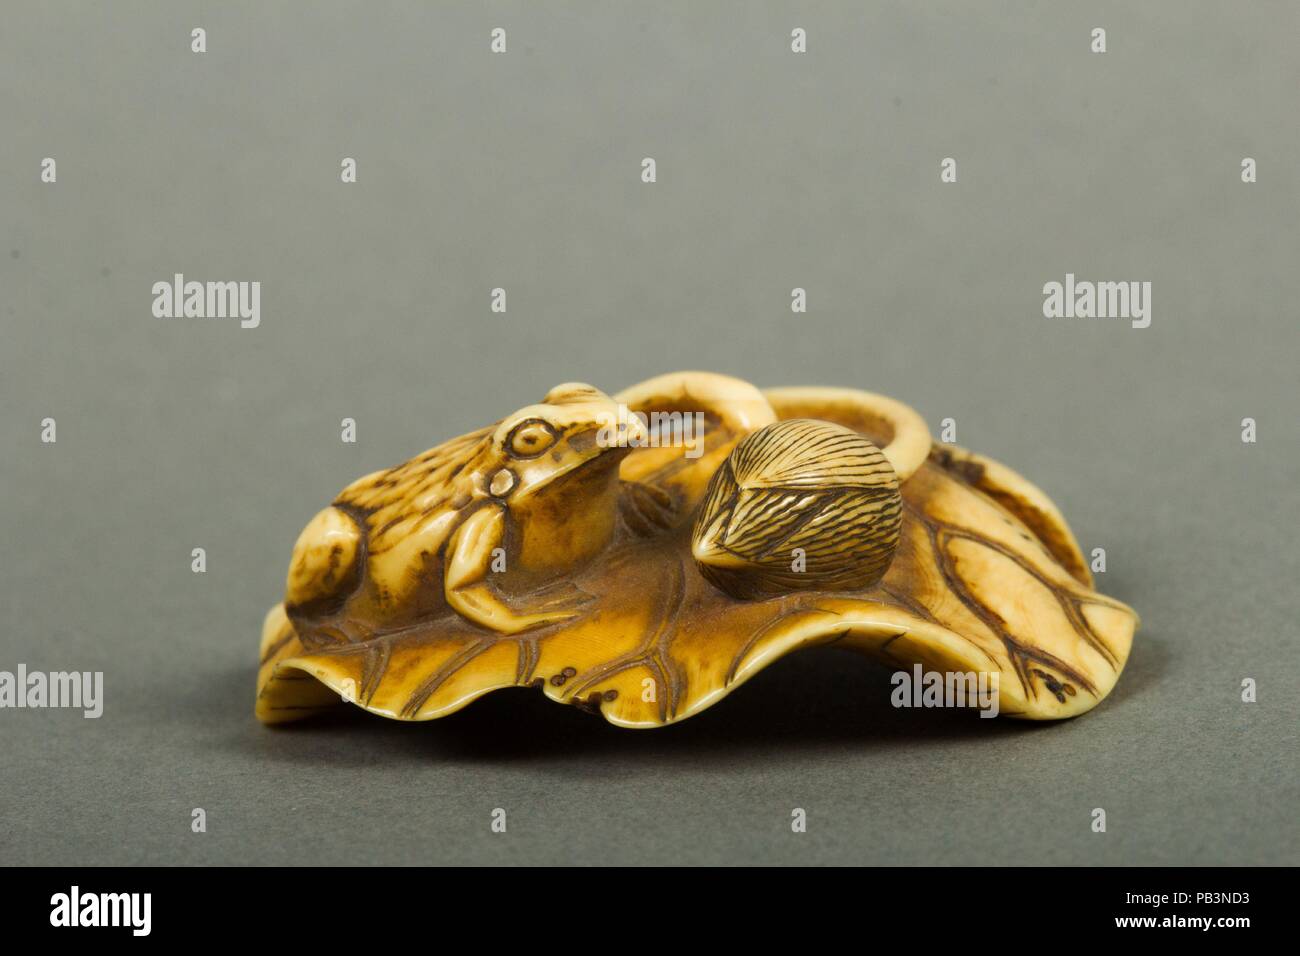 Netsuke of Frog on a Lotus Leaf. Culture: Japan. Dimensions: H. 5/8 in. (1.6 cm); W. 1 7/8 in. (4.8 cm); D. 1 5/8 in. (4.1 cm). Date: 18th century. Museum: Metropolitan Museum of Art, New York, USA. Stock Photo